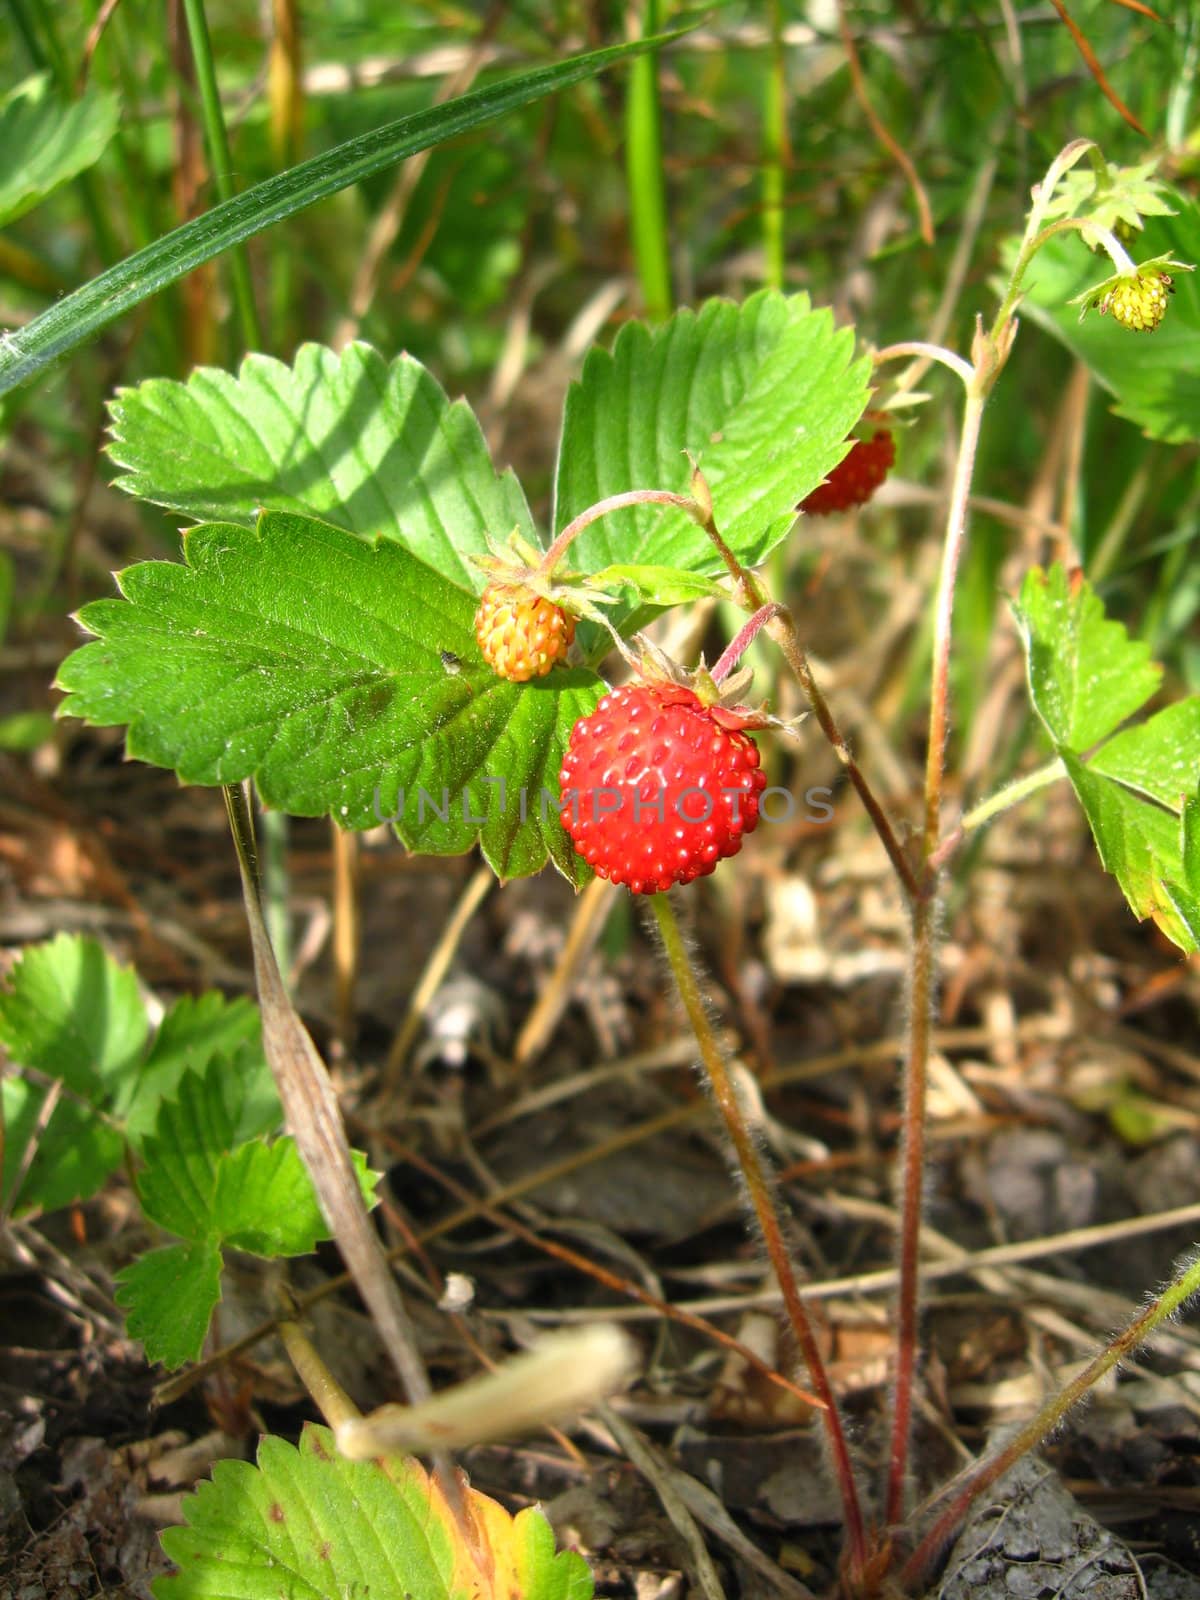 Beautiful wild strawberry found in a wood in summer